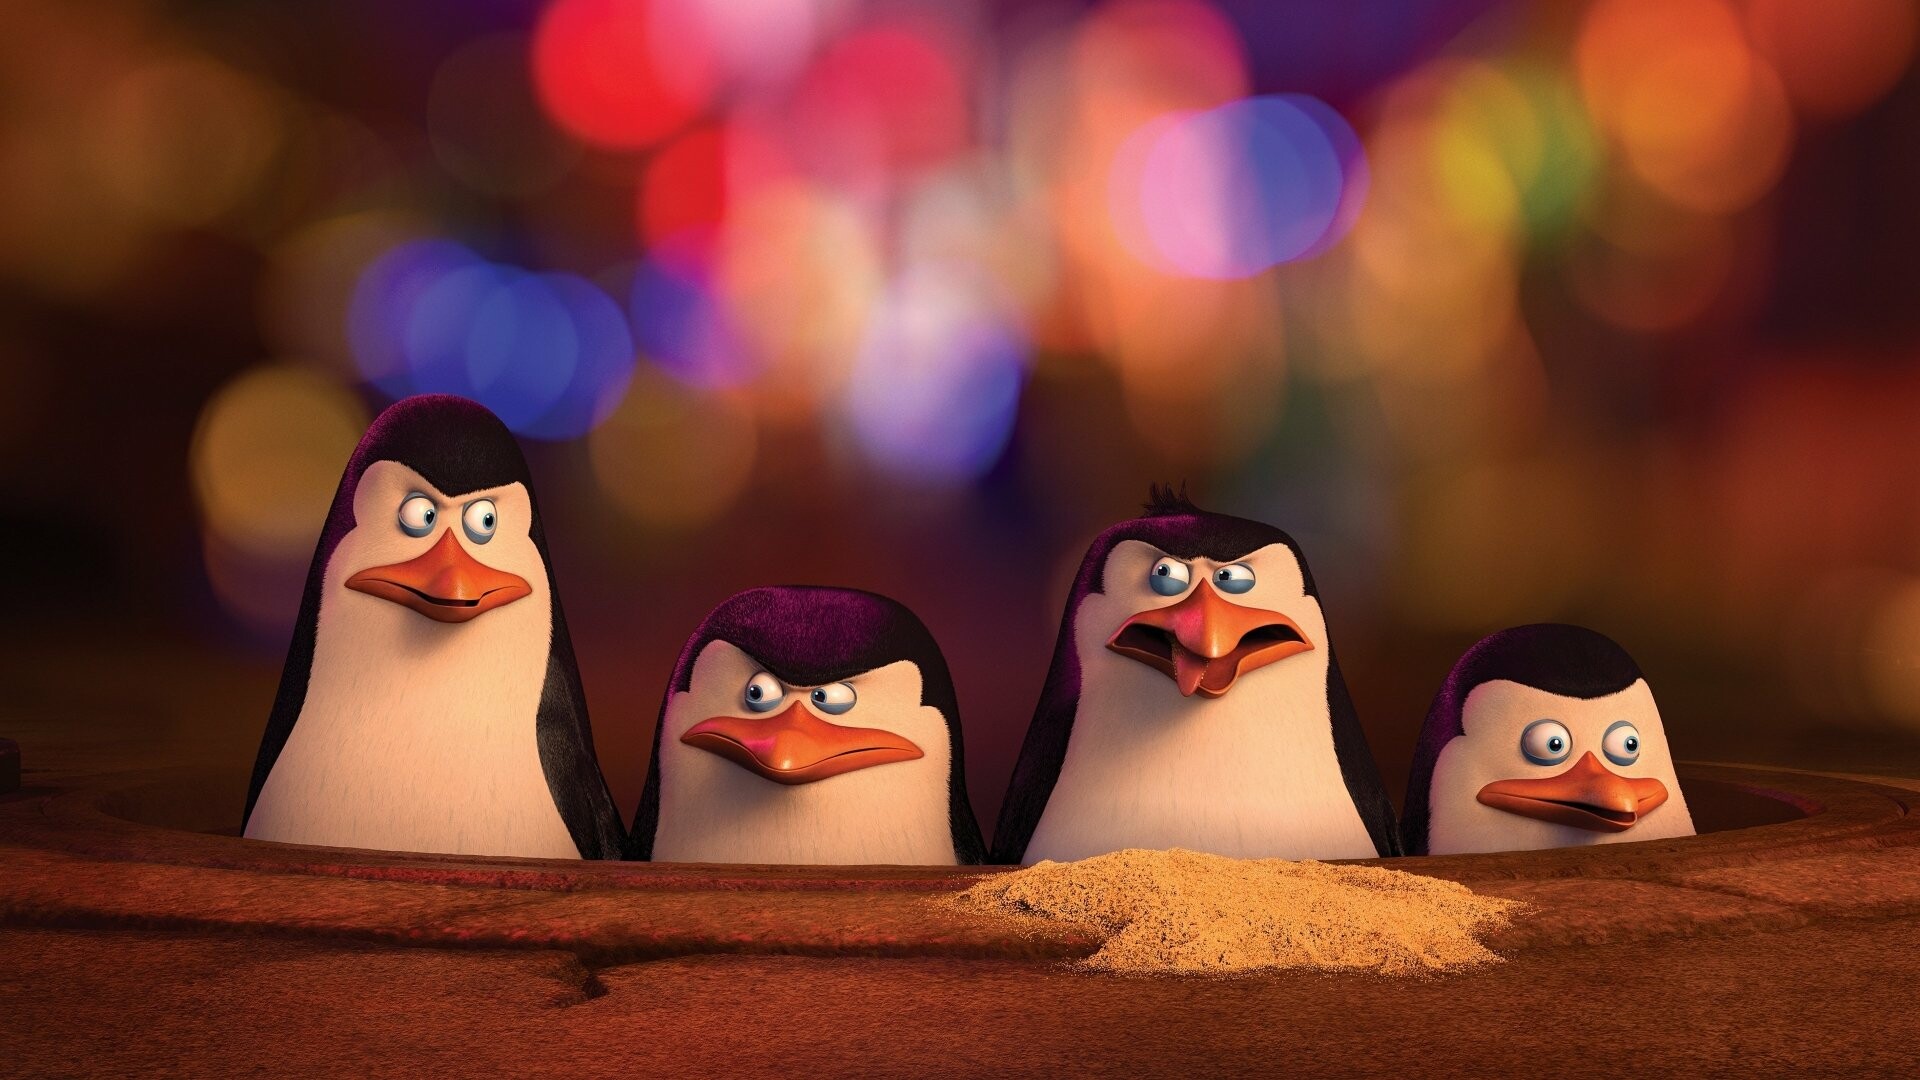 Madagascar (Movie): The penguins, Skipper, Kowalski, Rico and Private, Spin-off. 1920x1080 Full HD Wallpaper.